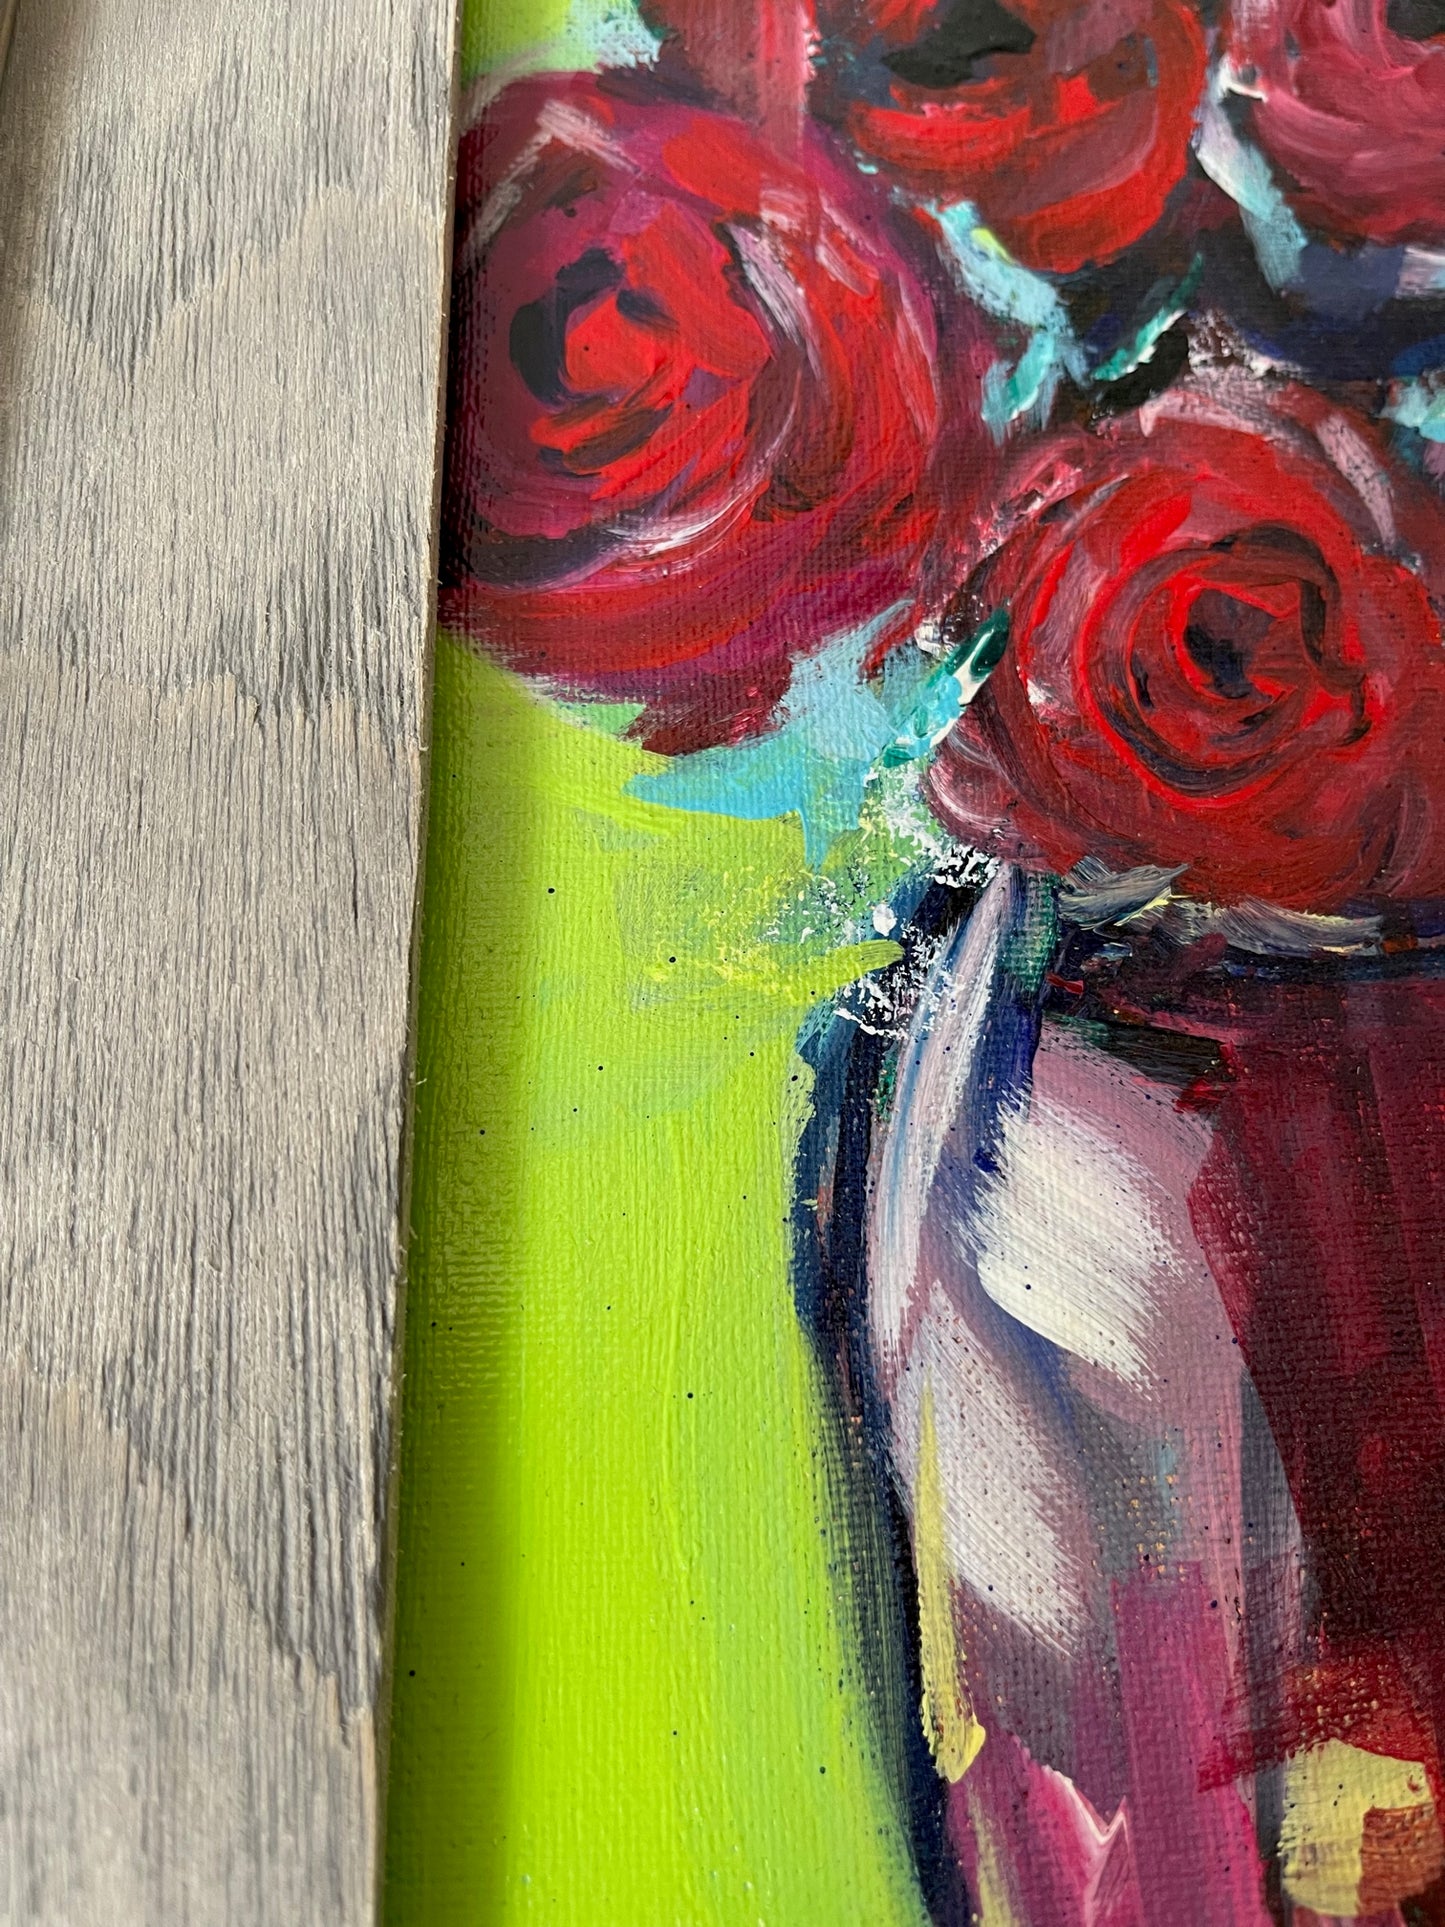 Red Roses in a Vase Original Acrylic Painting Framed 8 x 20